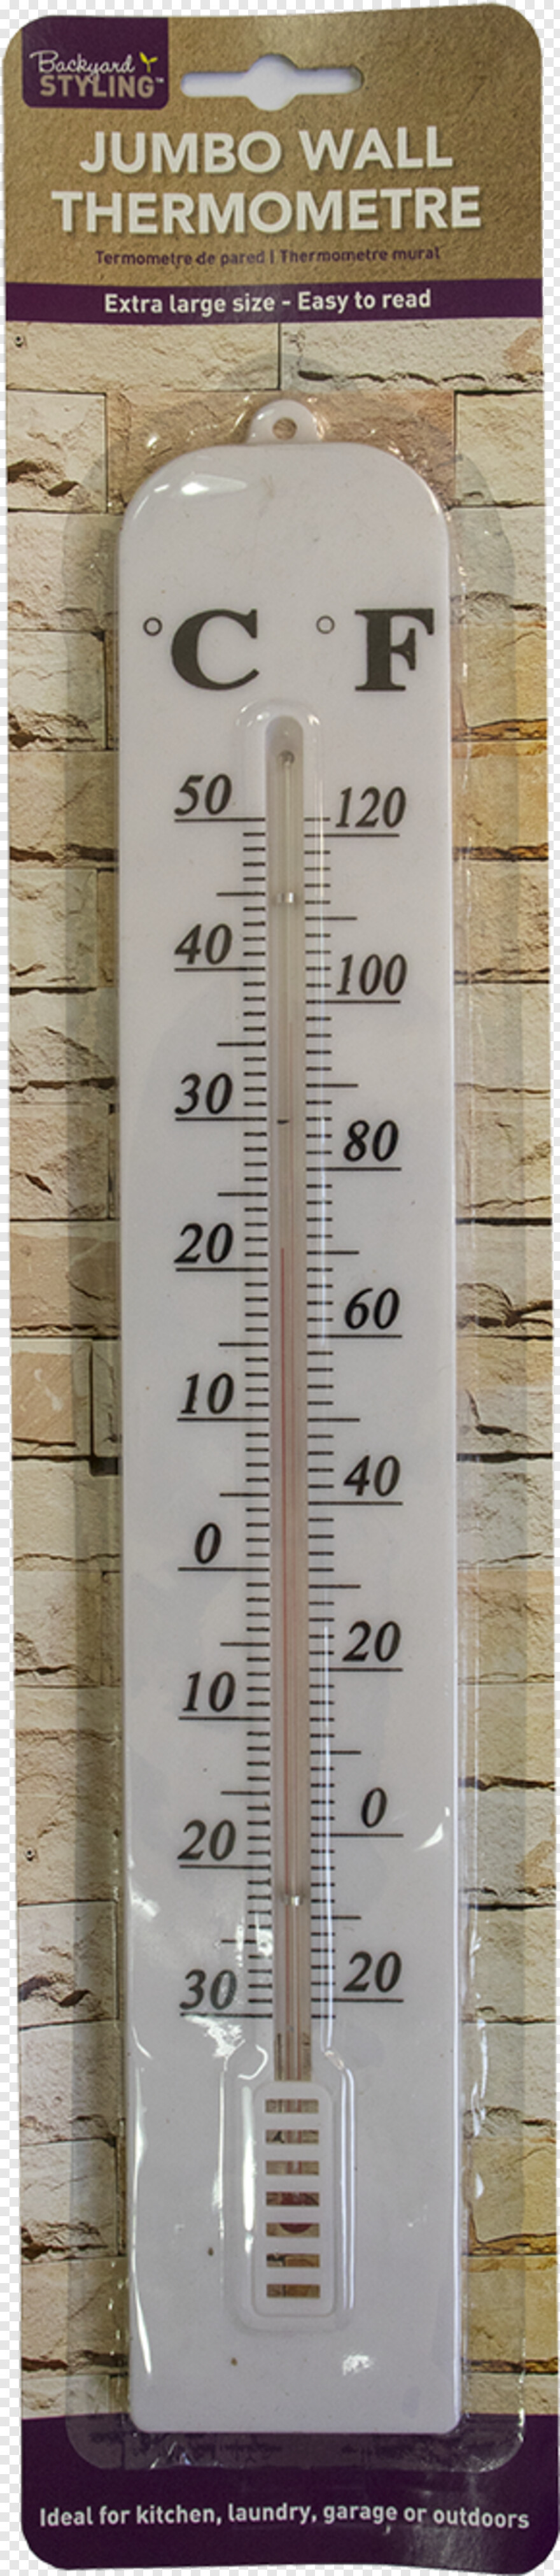 thermometer # 804004